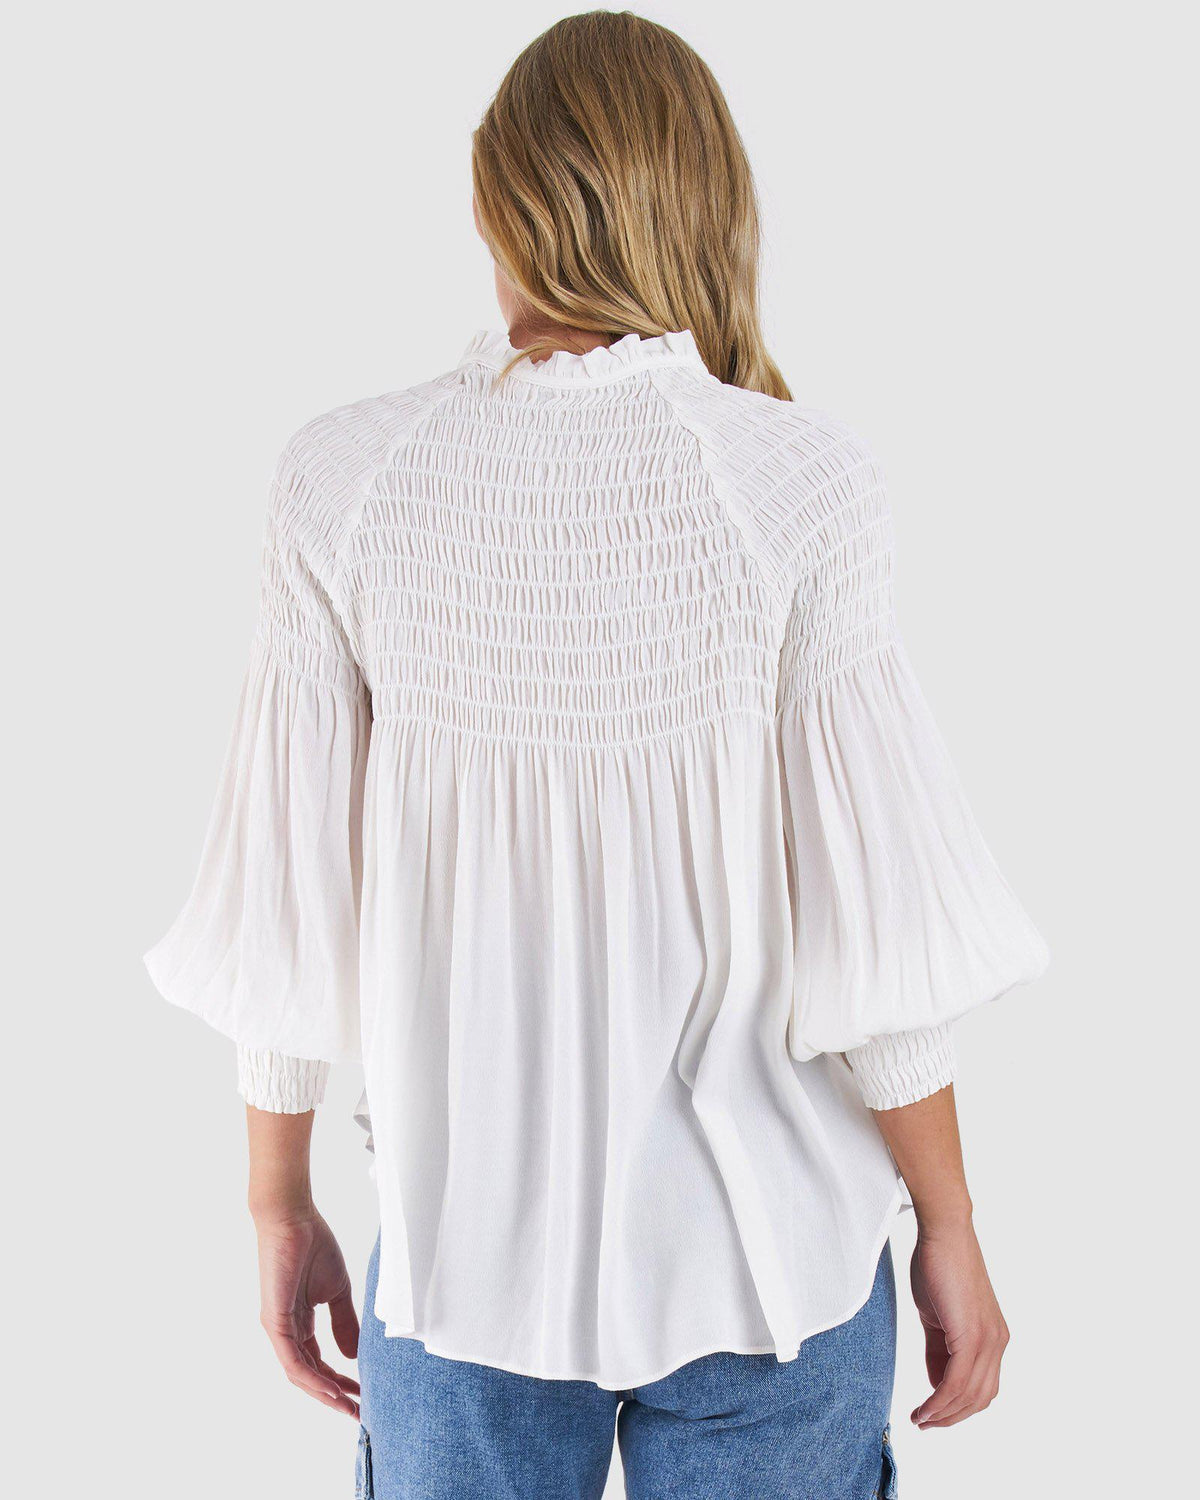 Ada L/S Top - White - Sass - FUDGE Gifts Home Lifestyle